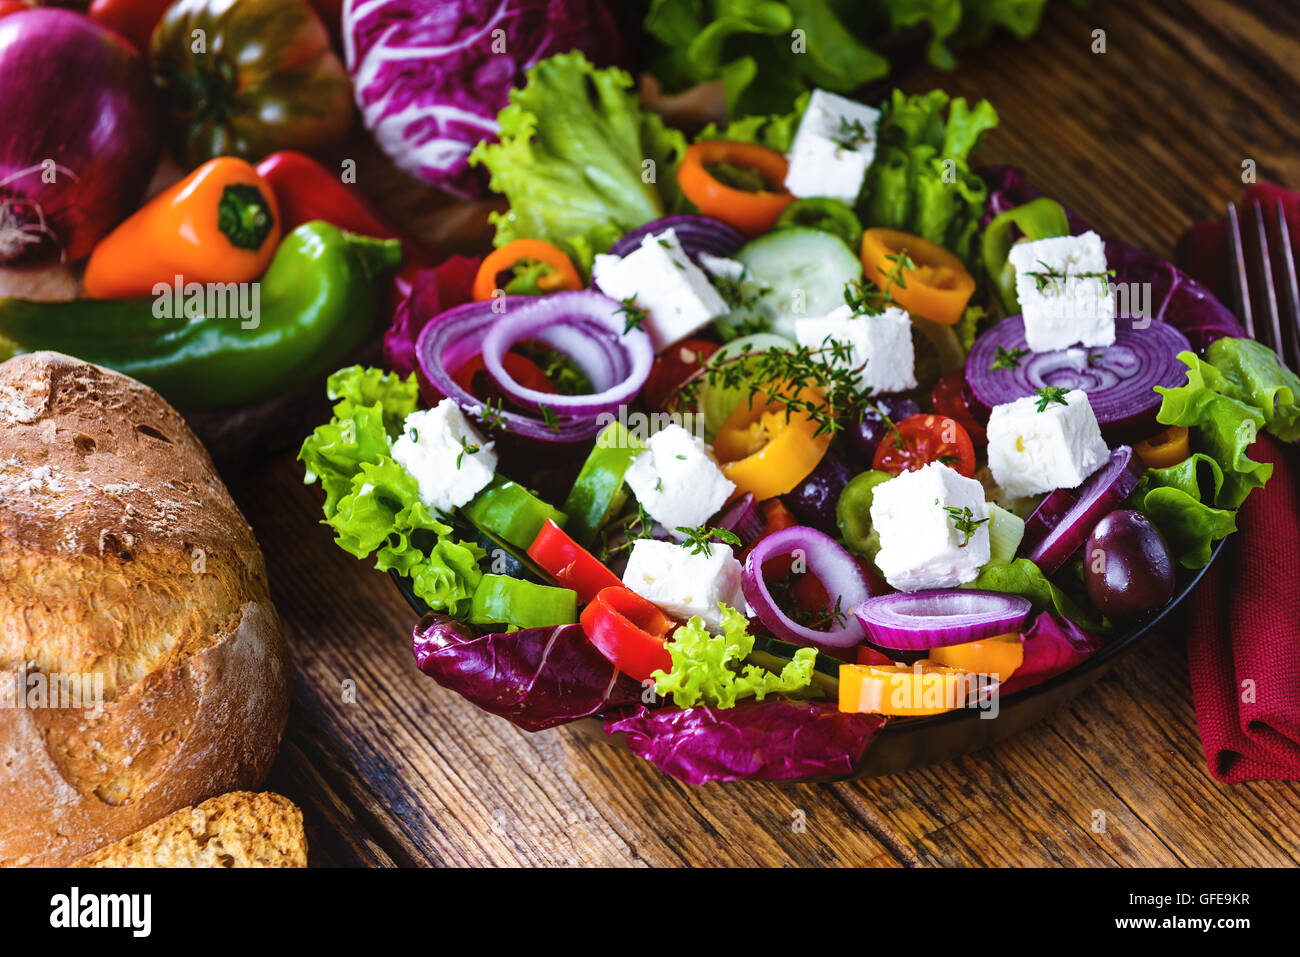 Crisp spring salad with feta cheese, full of vitamins and colors. Greec Salad on vintage table Stock Photo